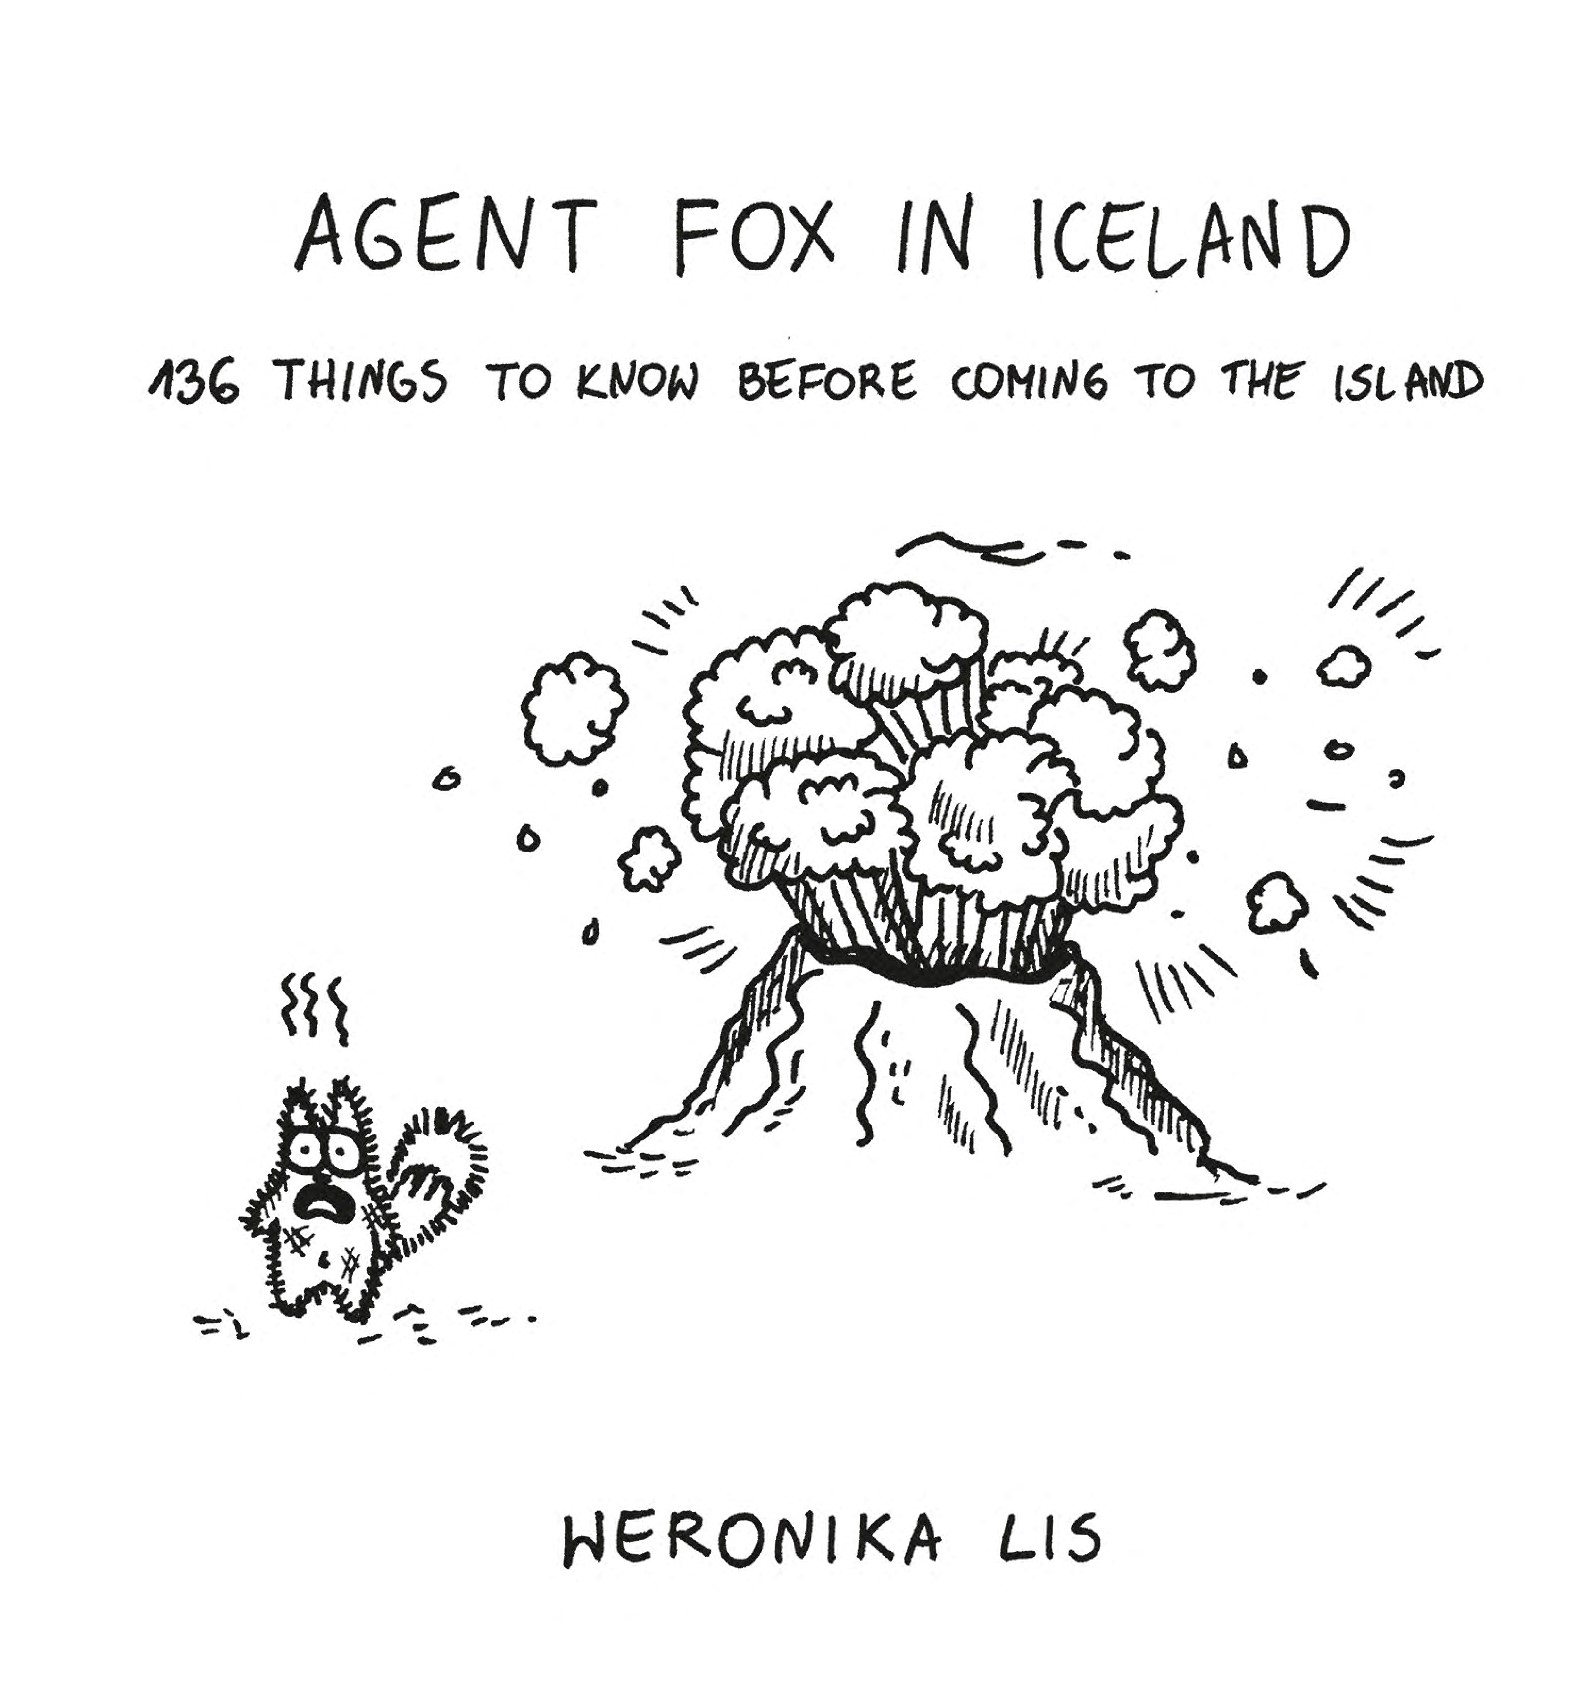 Agent Fox in Iceland